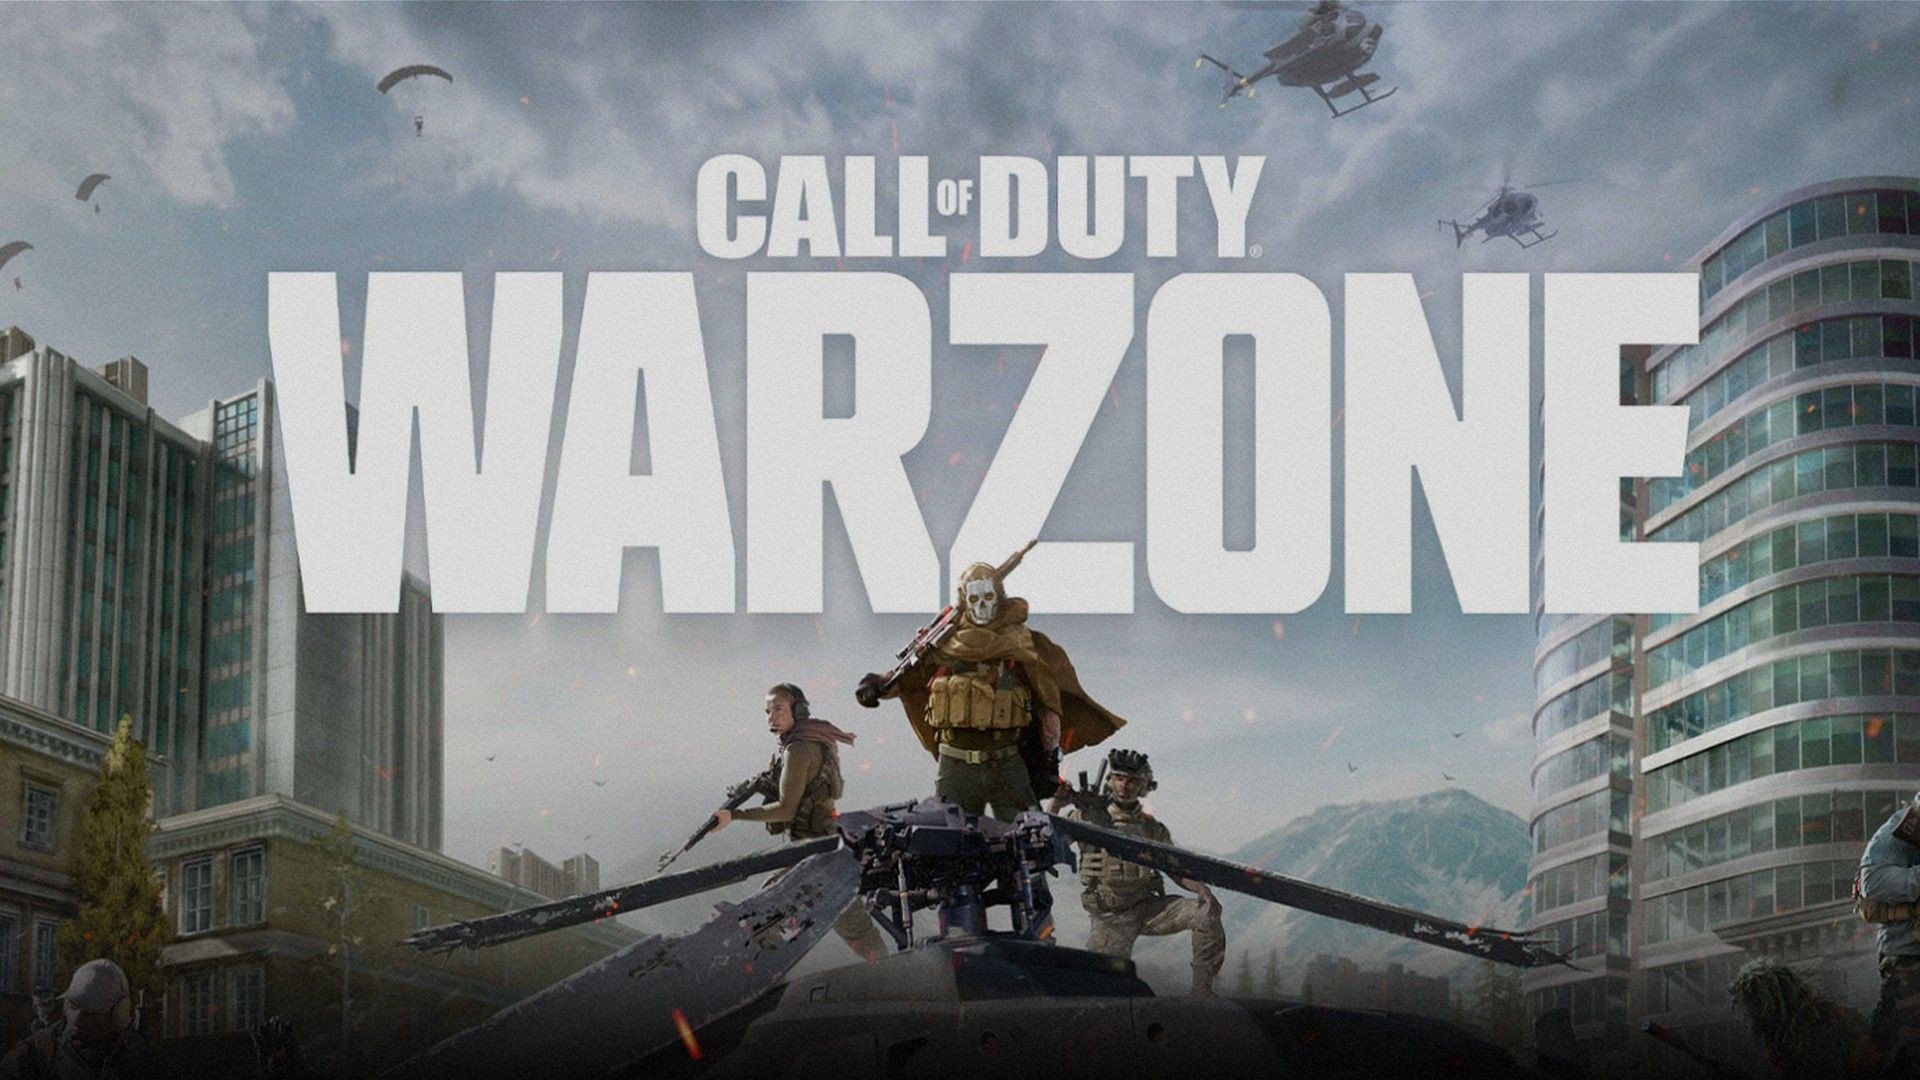 Call of Duty Warzone - Is It A Game?